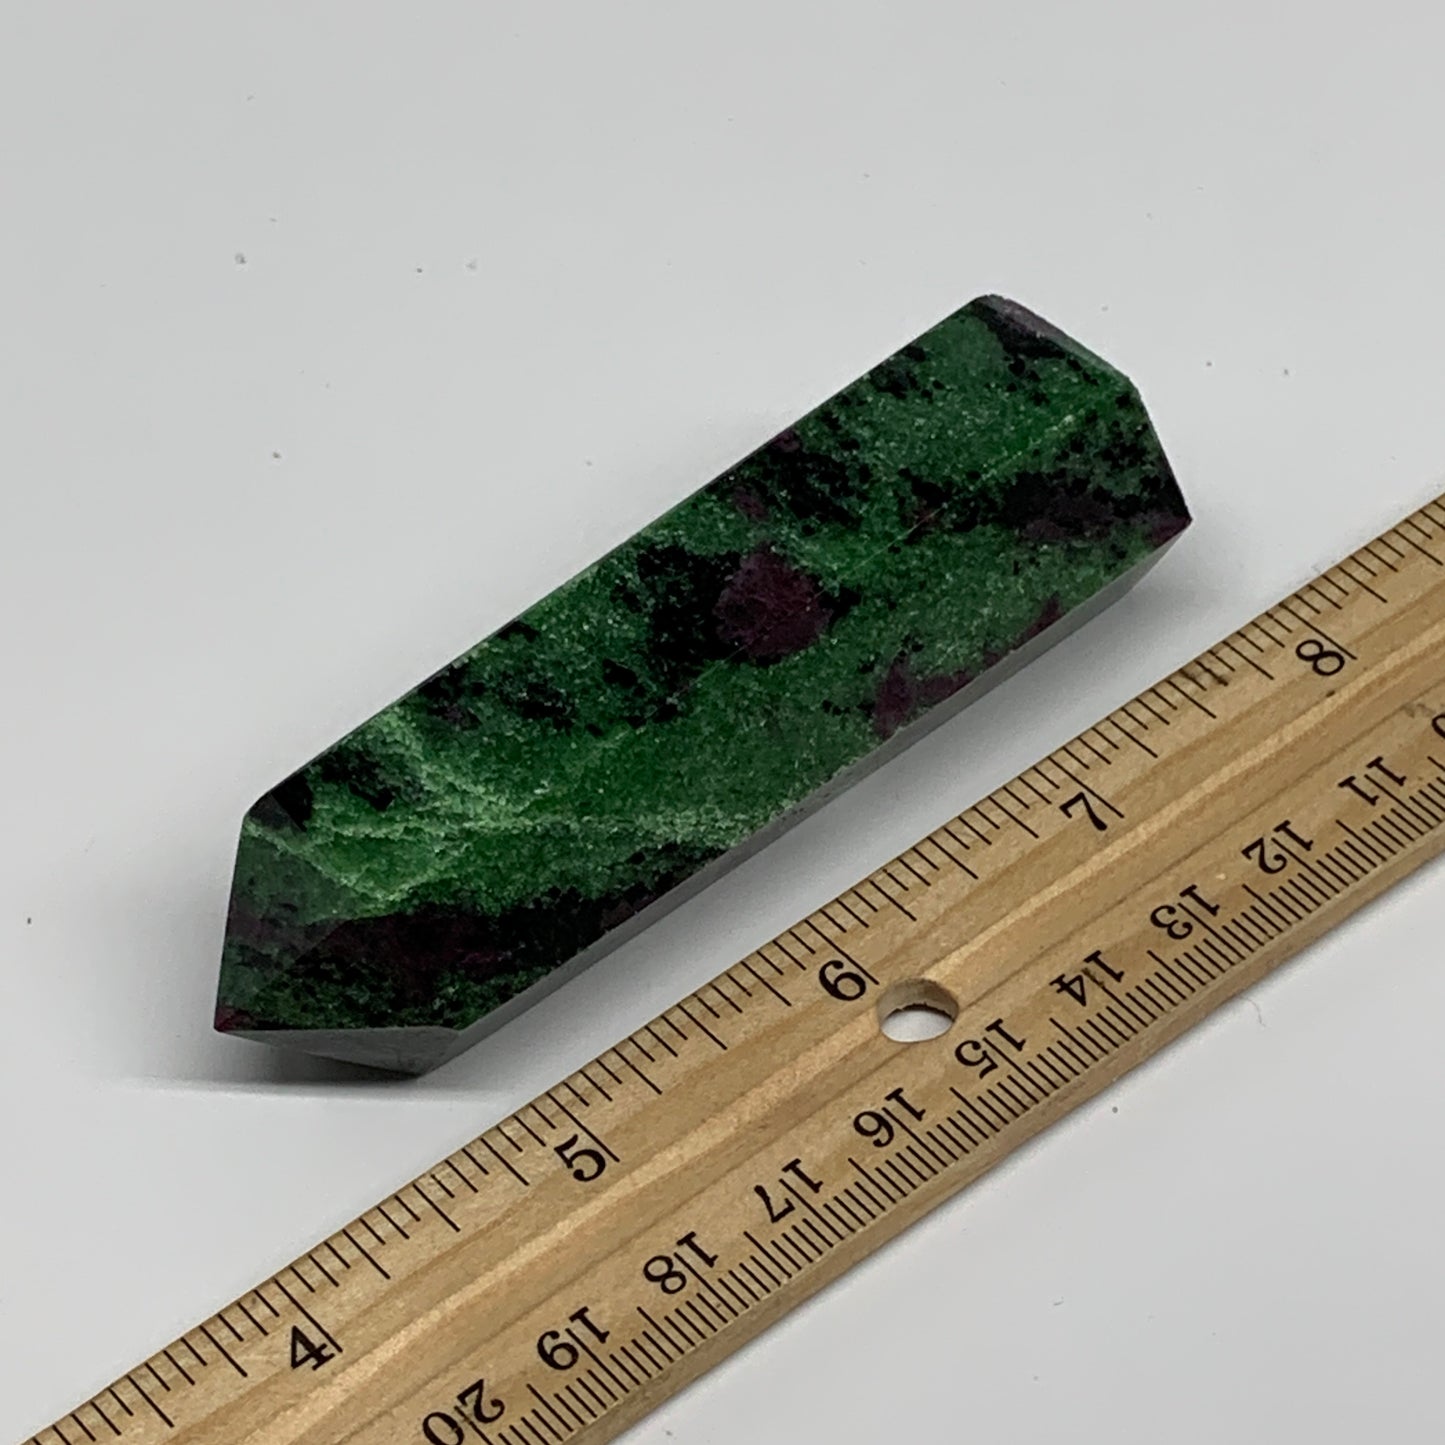 134g, 3.5"x1", Natural Ruby Zoisite Tower Point Obelisk @India, B31436